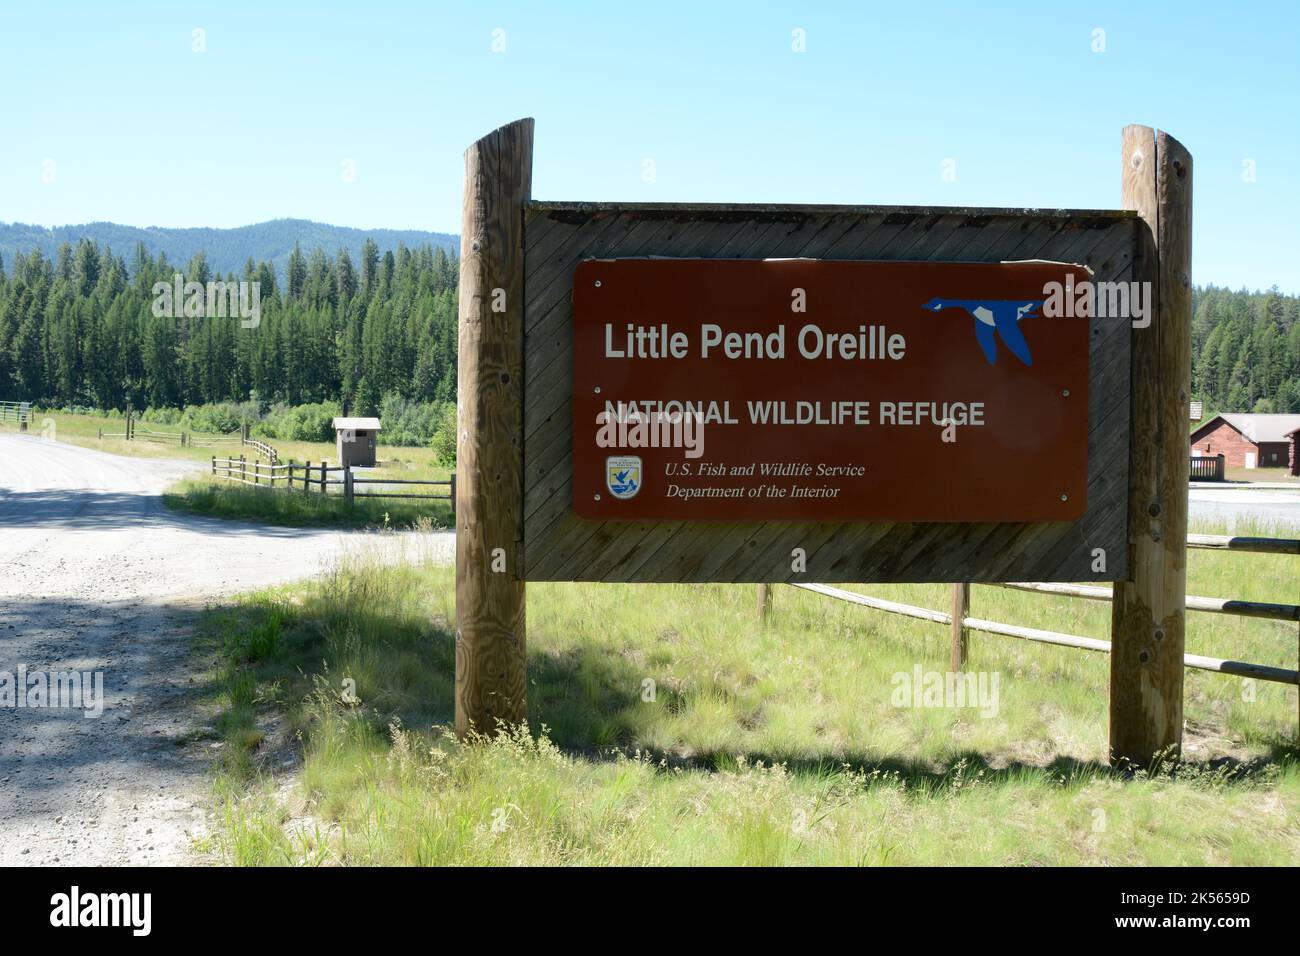 The road entrance to the Little Pend Oreille National Wildlife Refuge near the town of Colville in northeastern Washington State, USA. Stock Photo